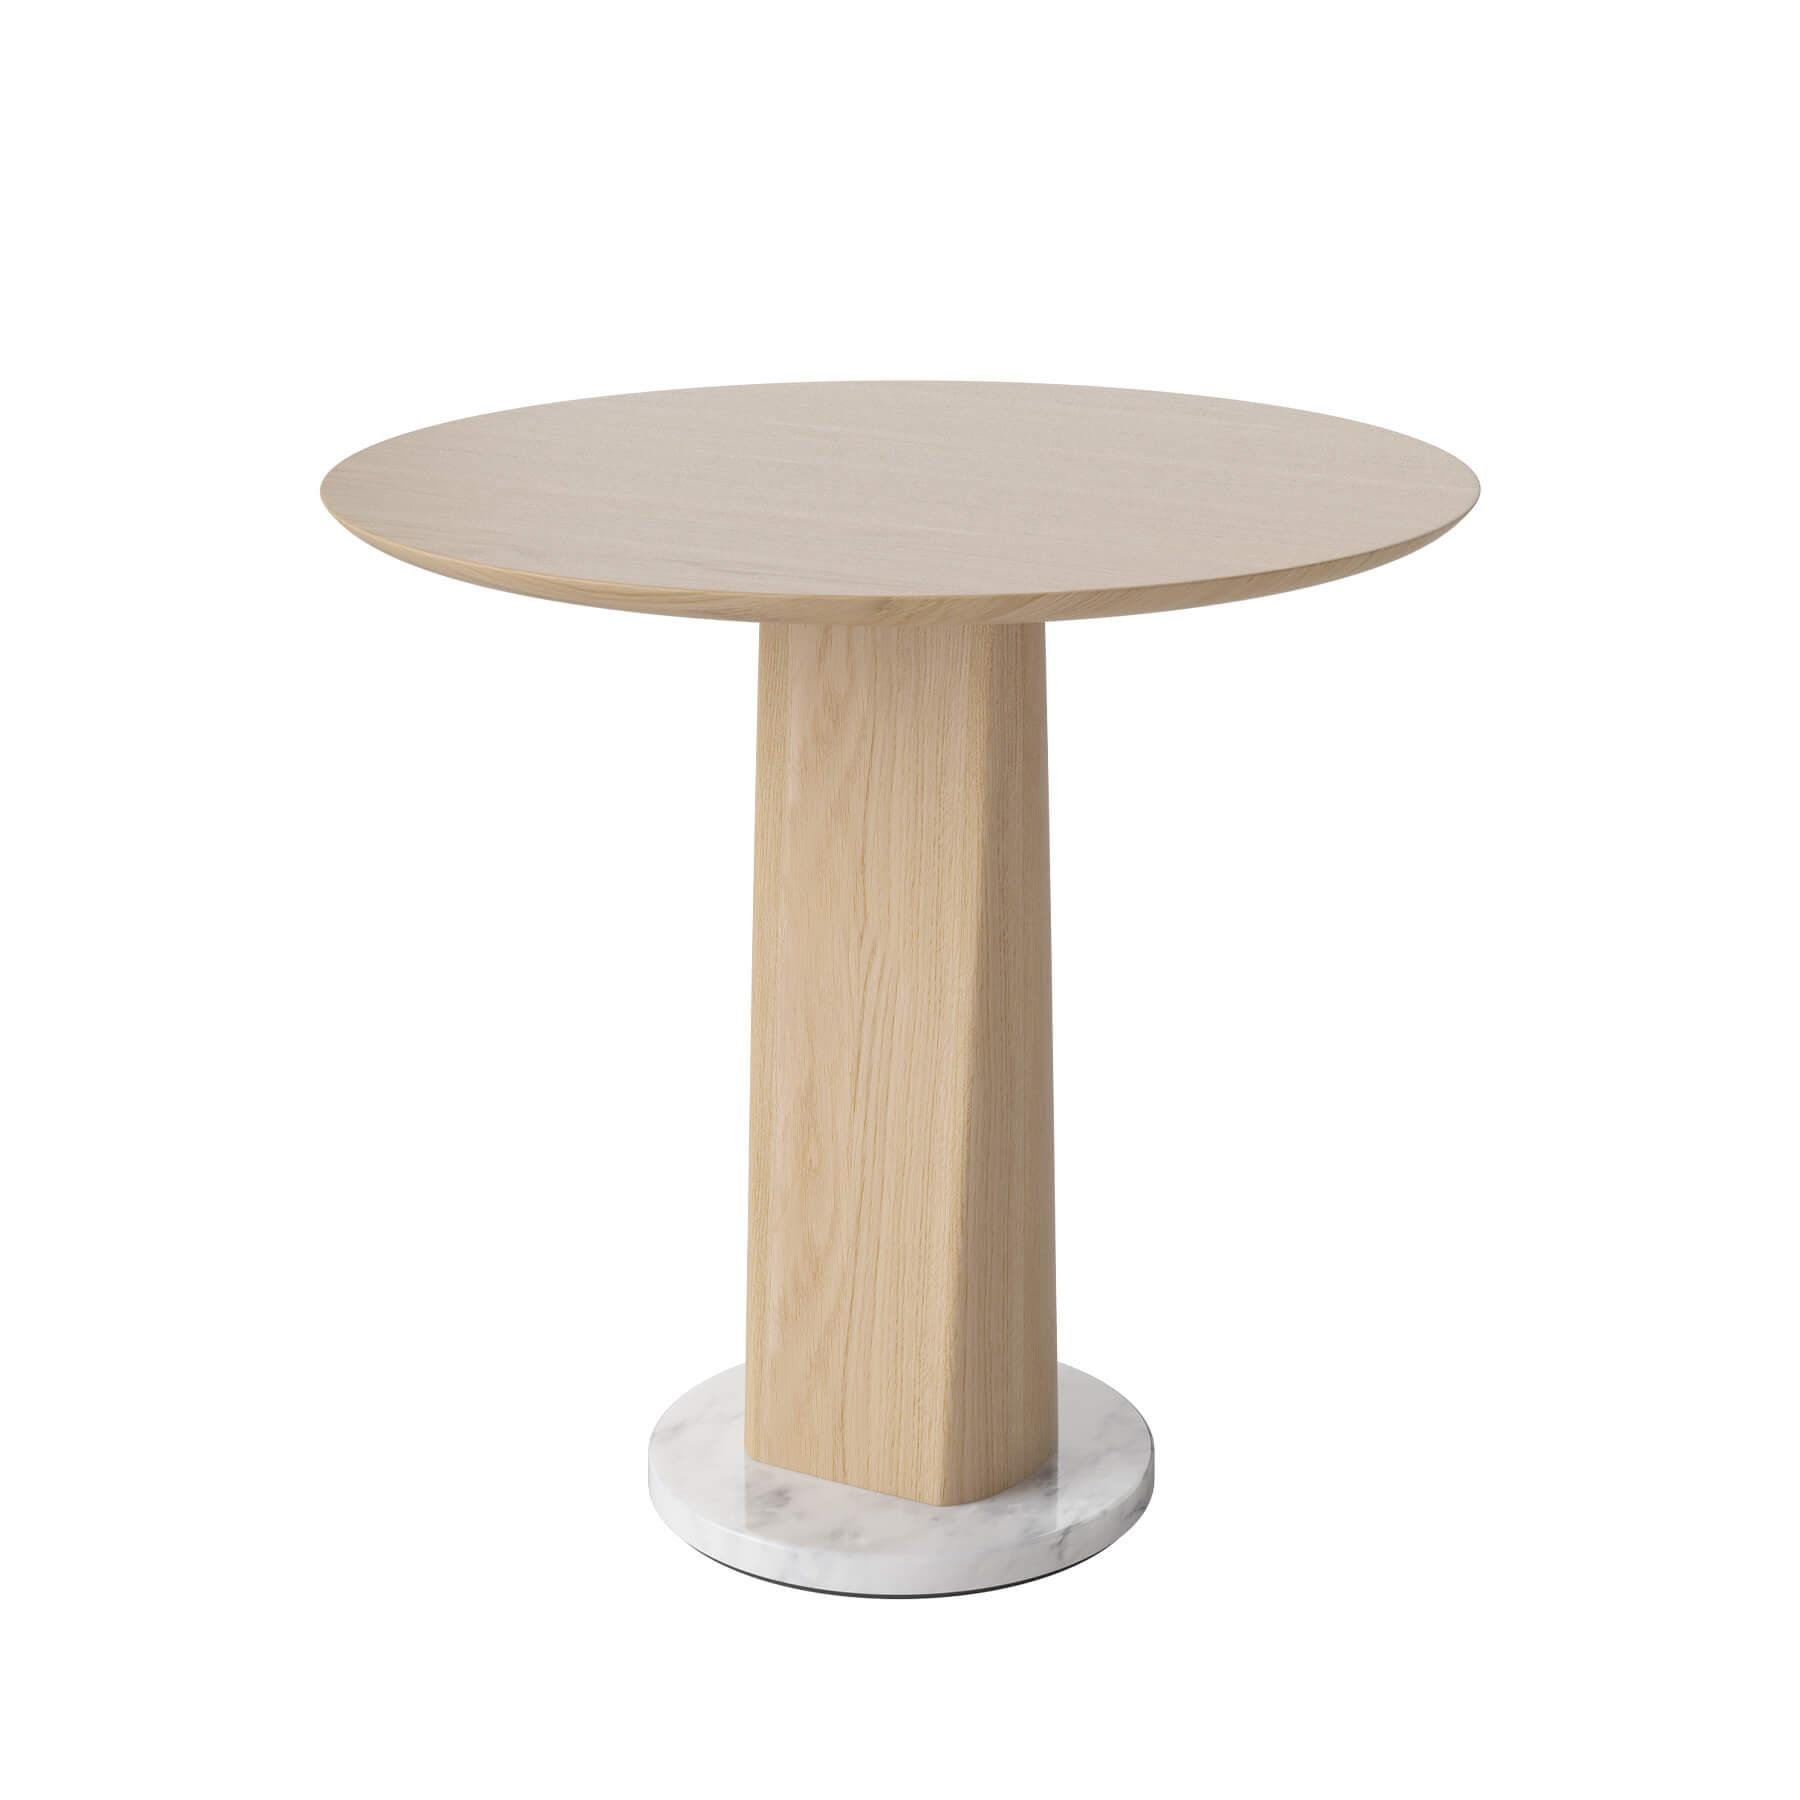 Bolia Root Side Table Large High White Oiled Oak Light Wood Designer Furniture From Holloways Of Ludlow